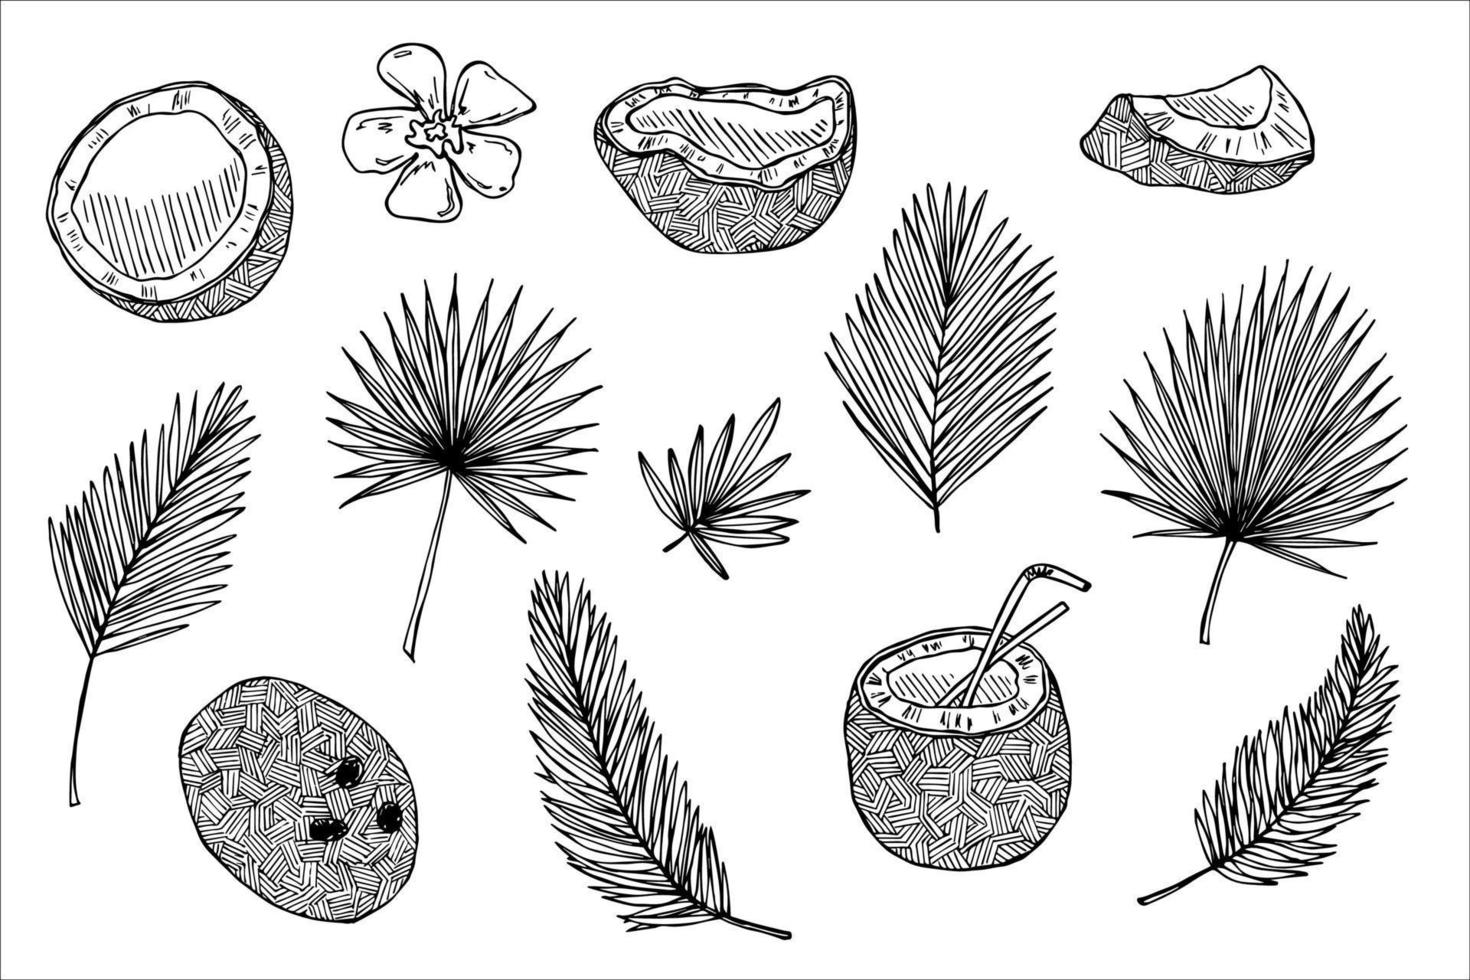 Set of coconut cliparts. Hand drawn nut icon. Tropical illustration. For print, web, design, decor vector